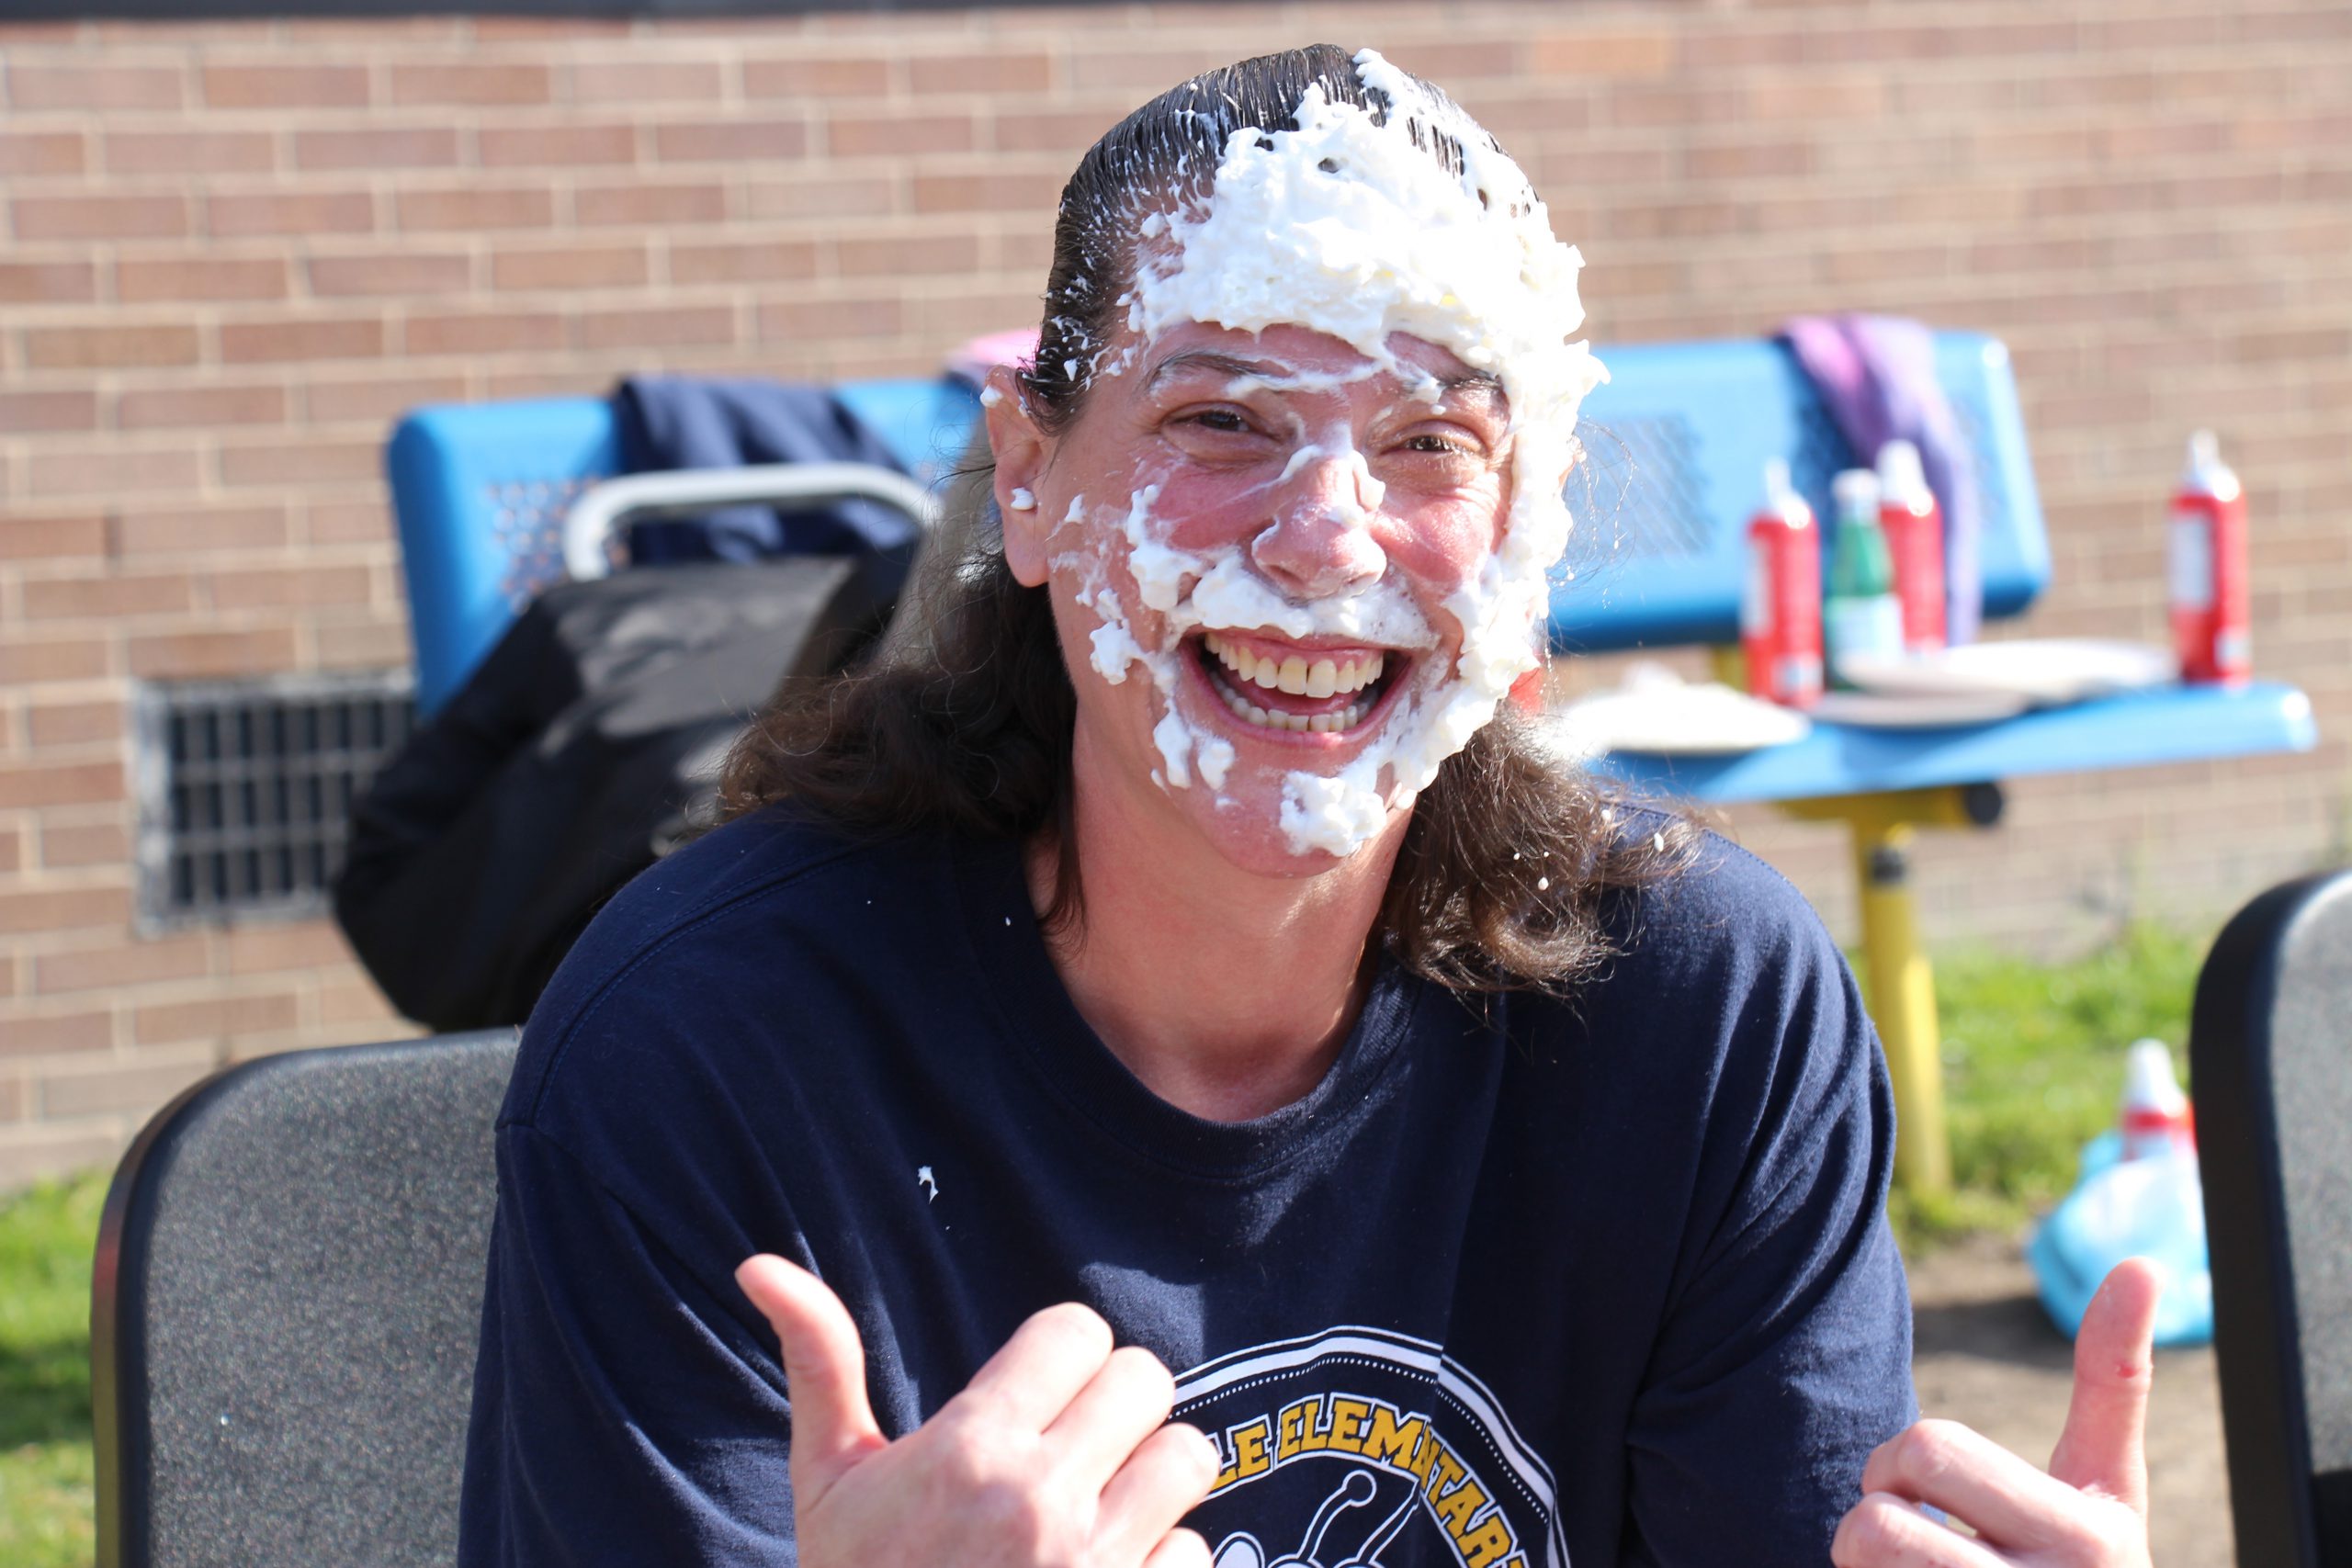 A woman in a navy blue shirt has whipped cream all over her face. She is smiling and giving a thumbs up.